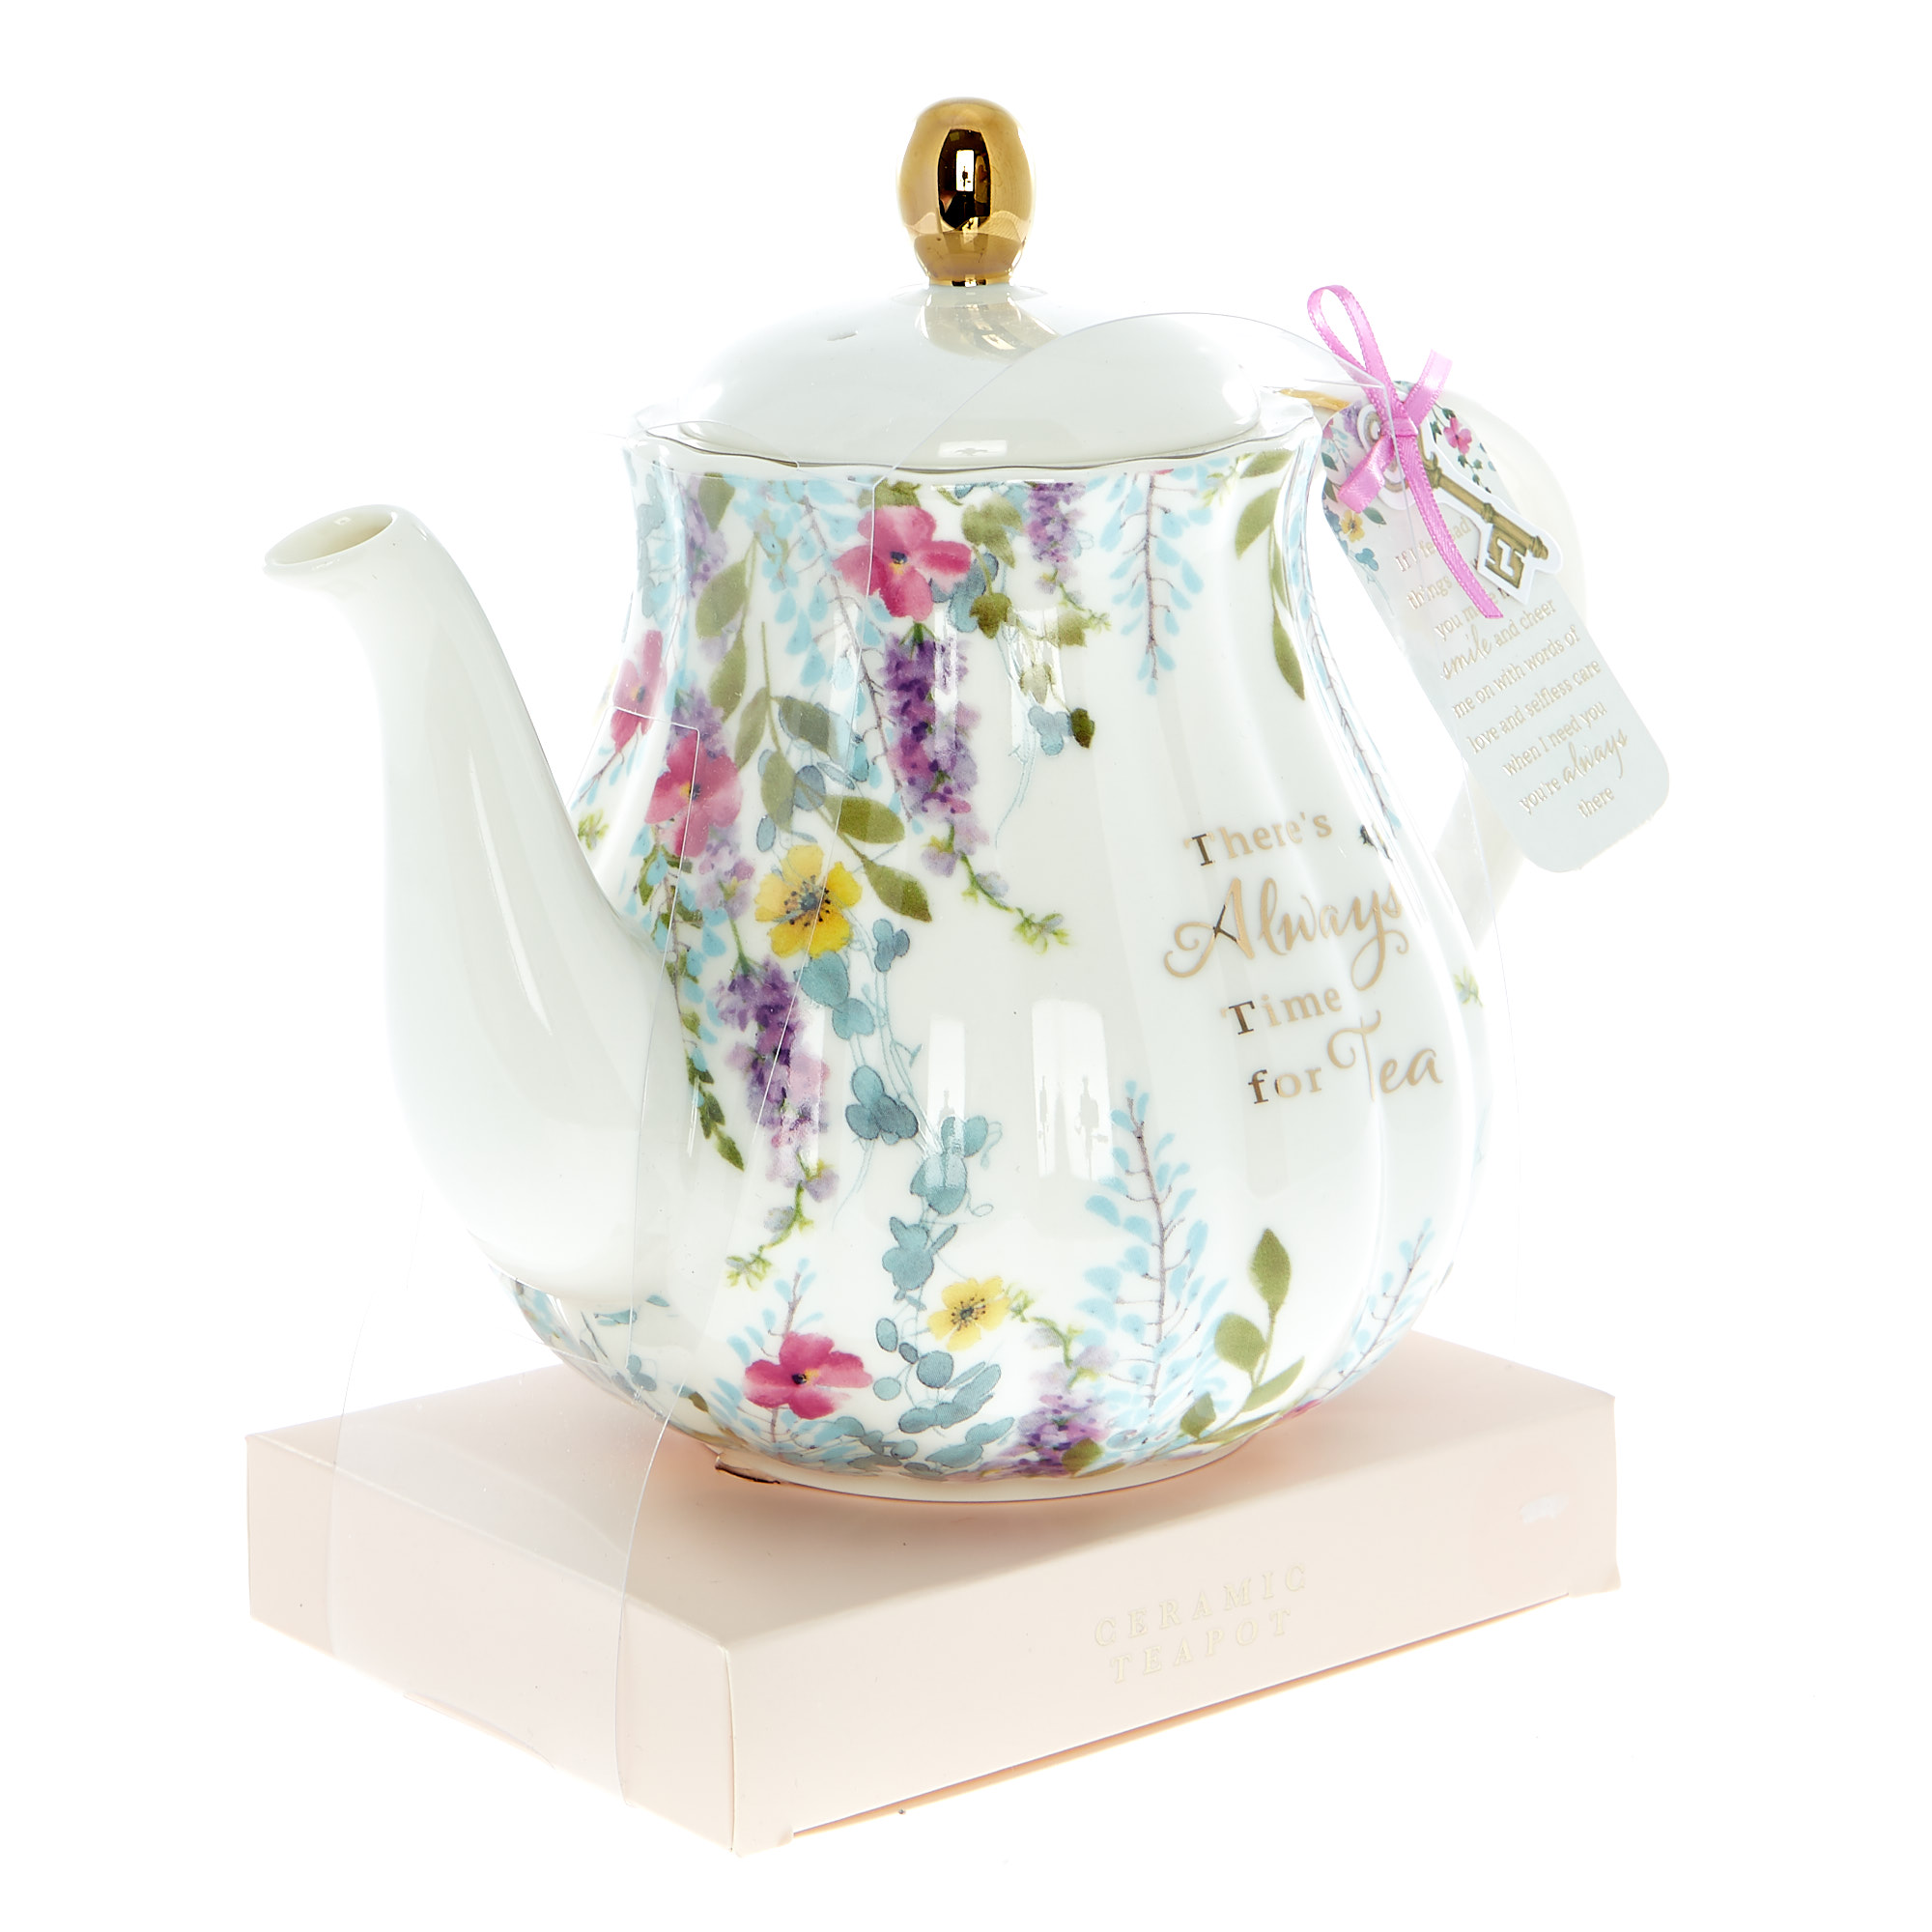 There's Always Time For Tea Ceramic Teapot 